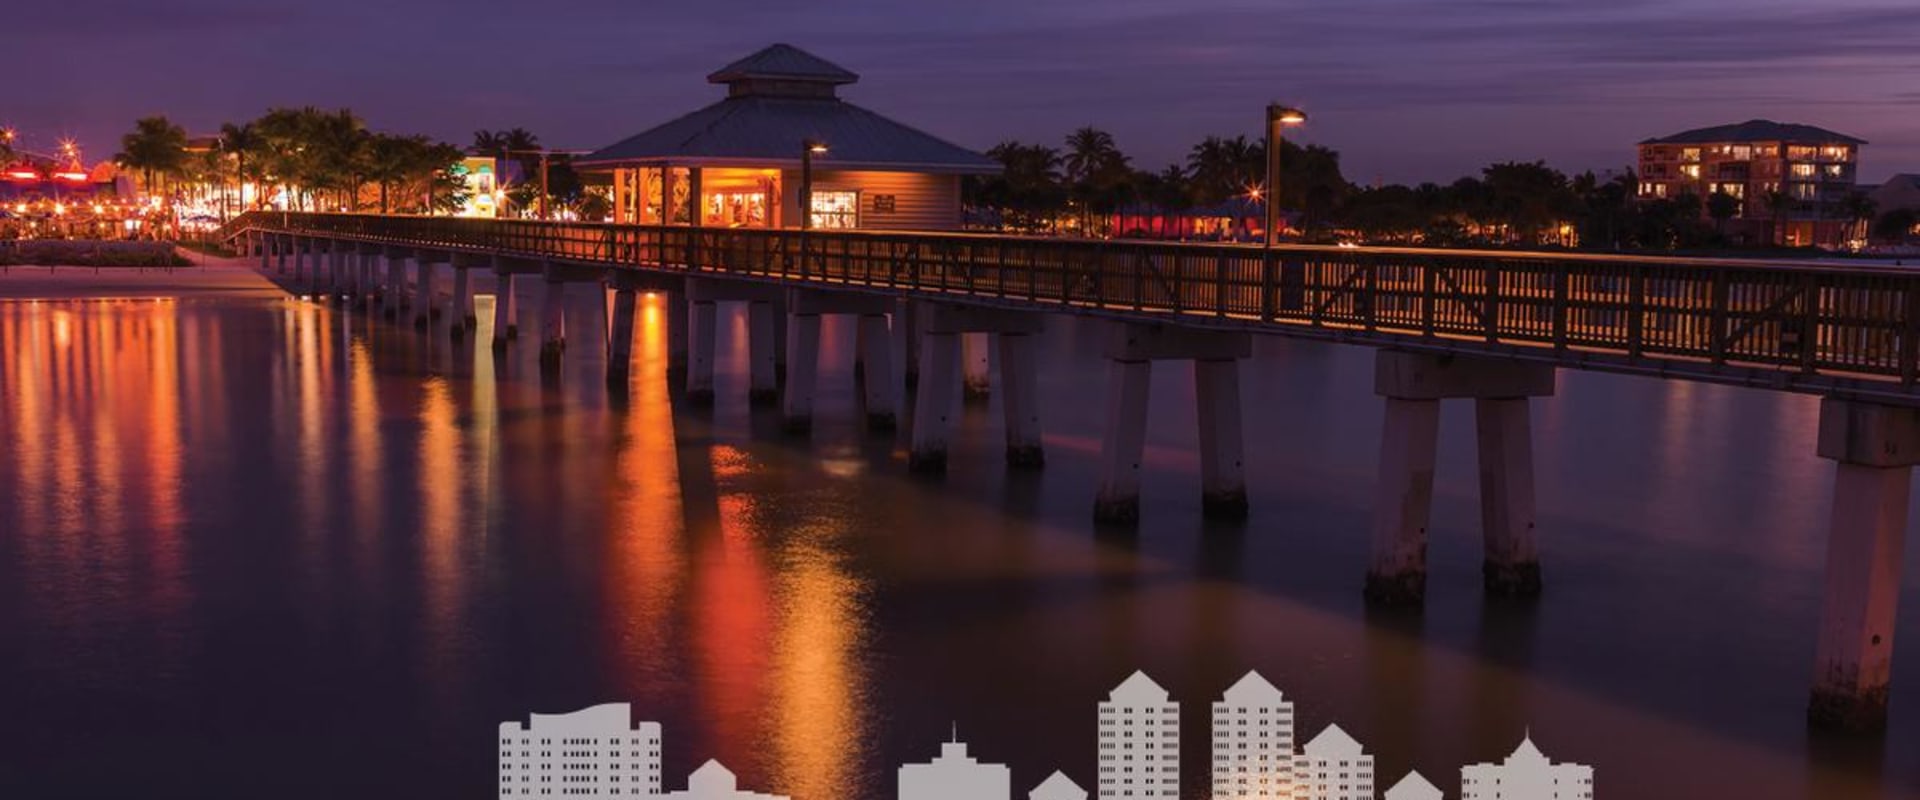 Discover the 8,000+ Businesses in Lee County, Florida